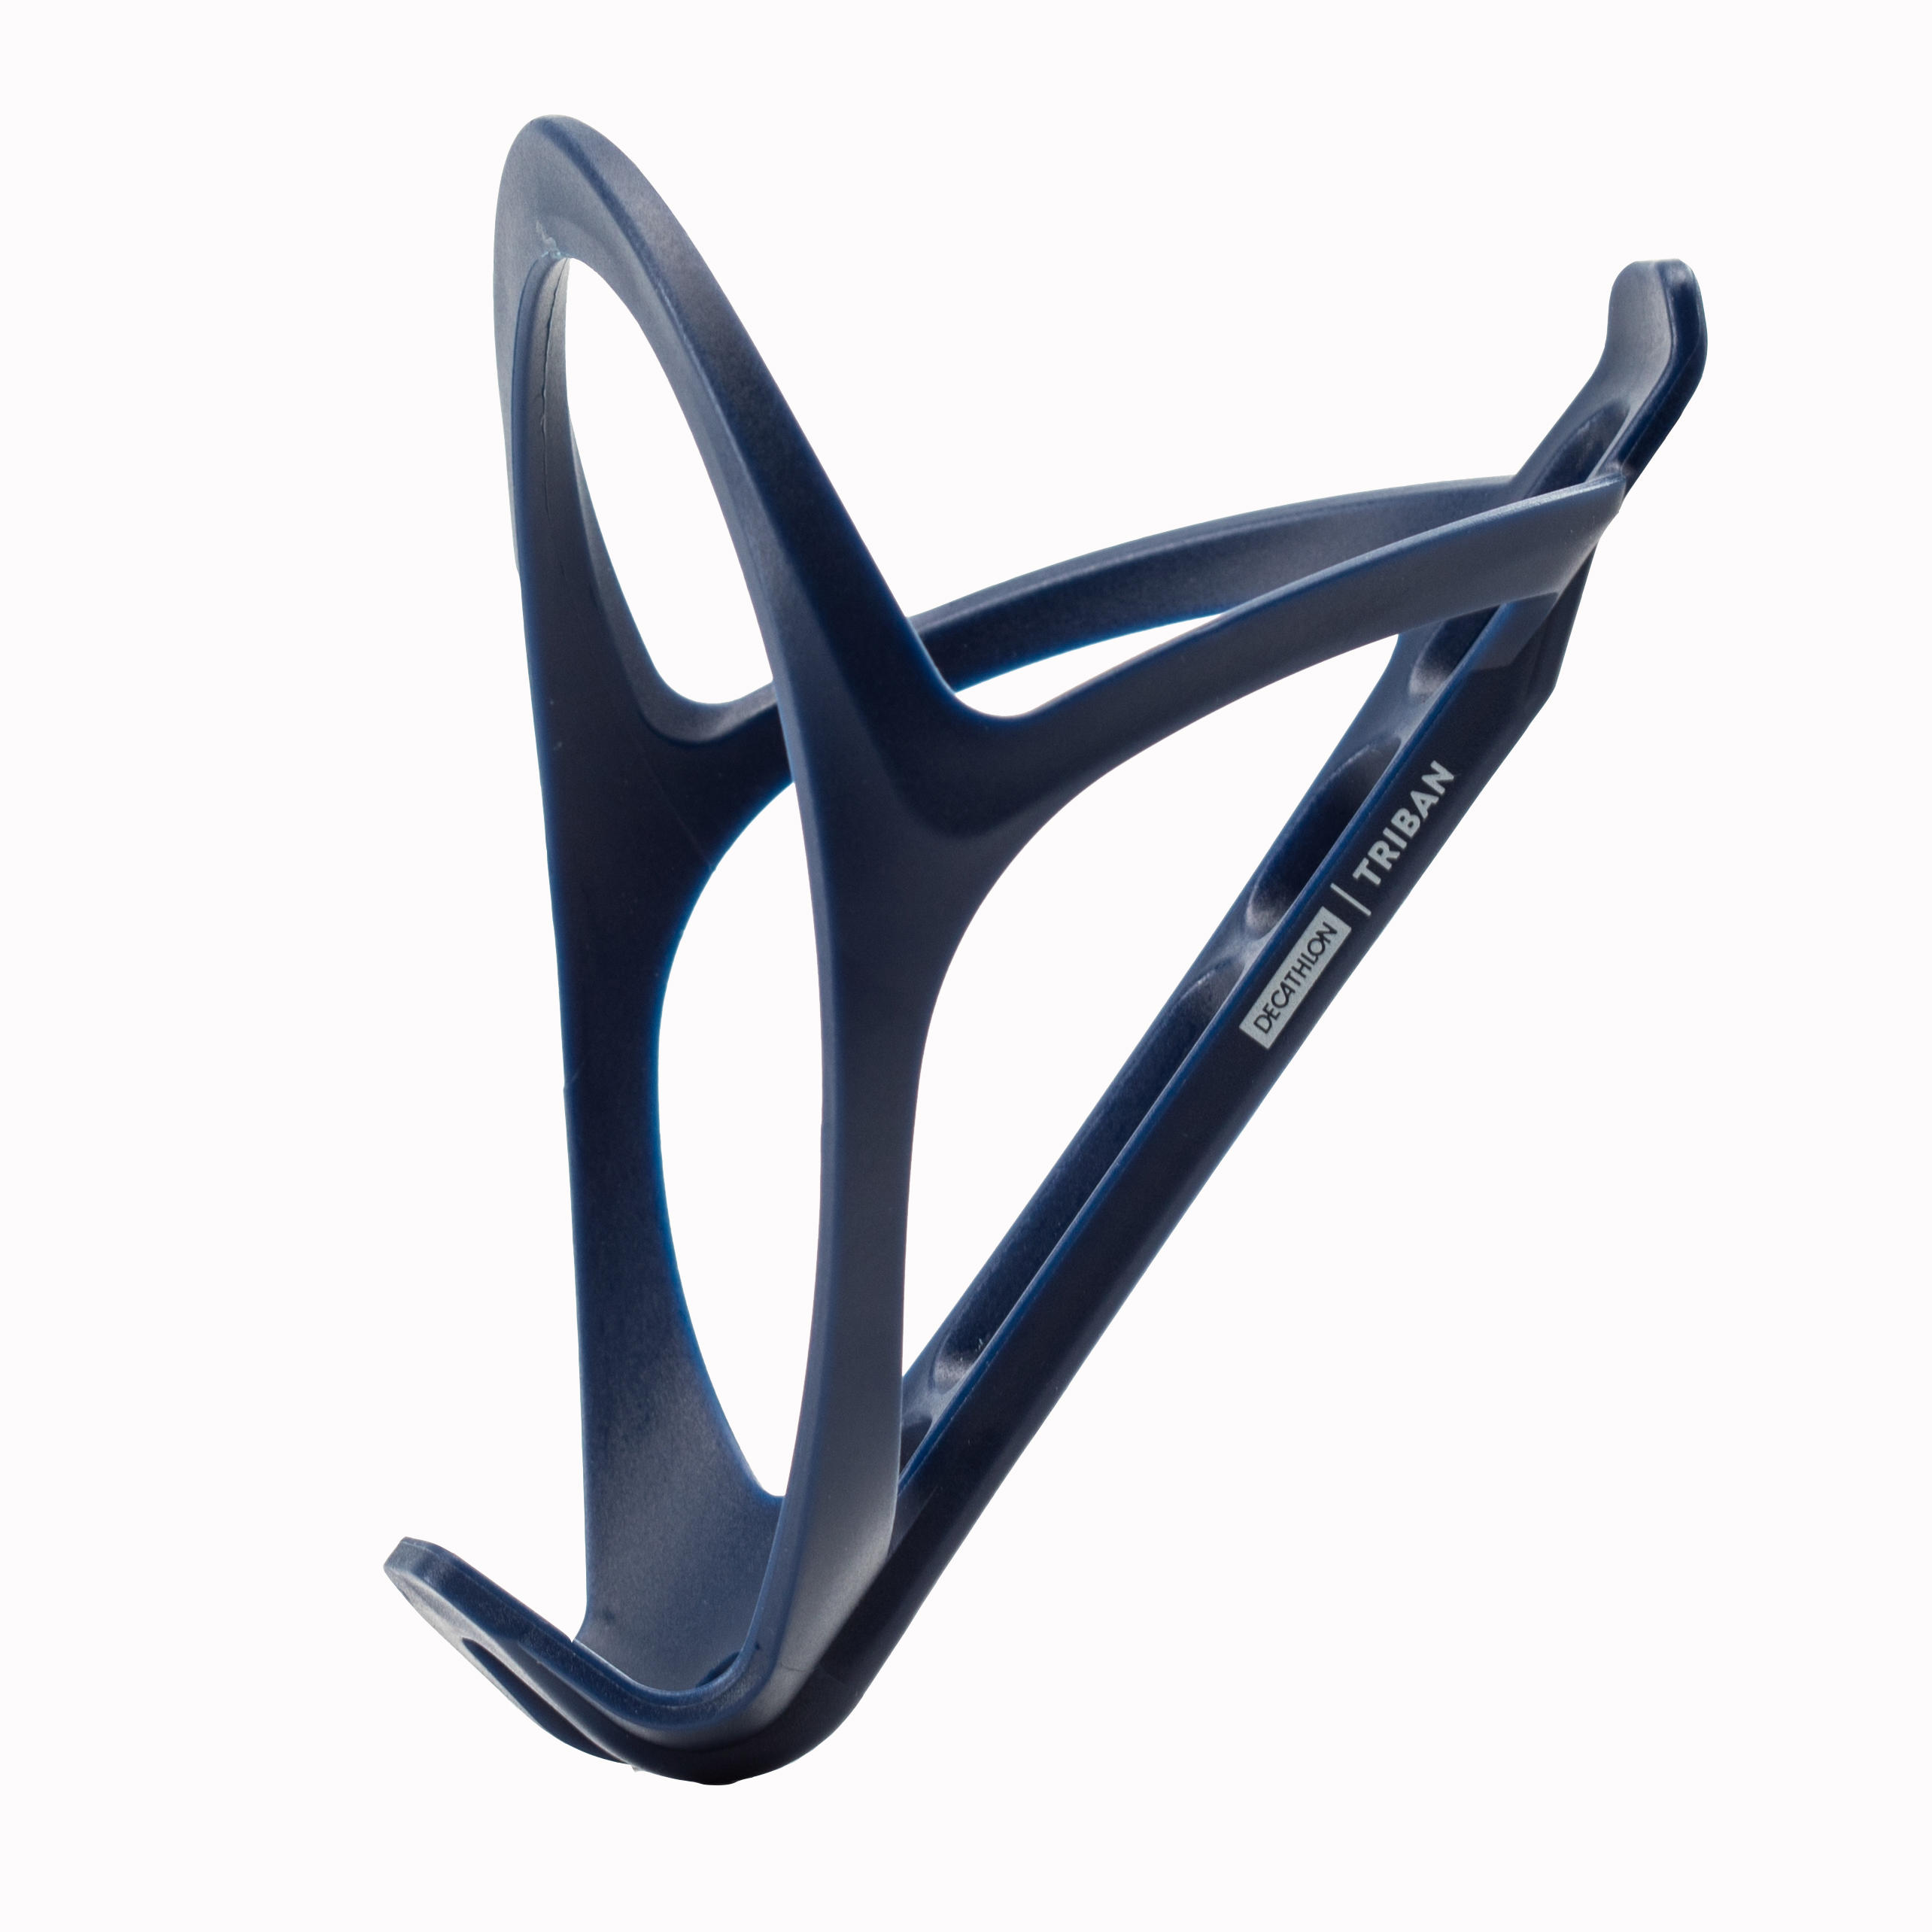 btwin bottle cage mount